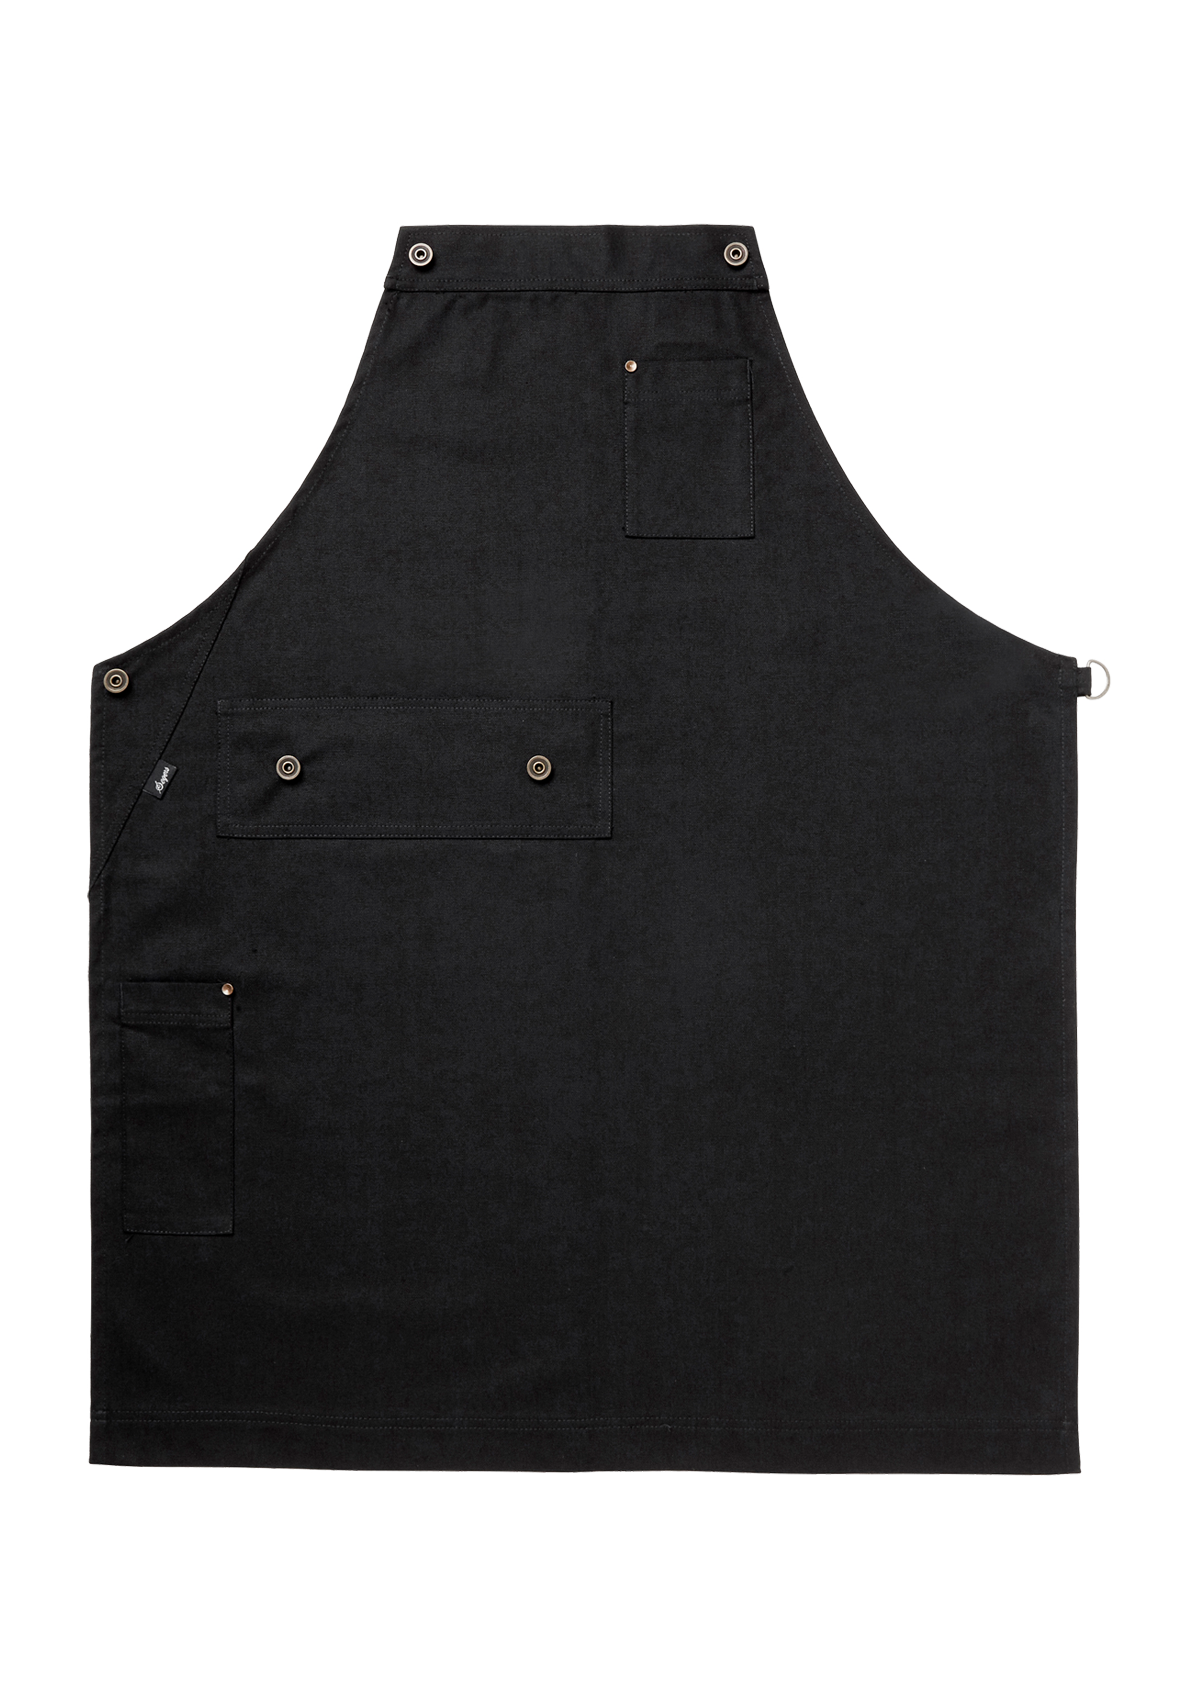 Bib Apron with Leather Details